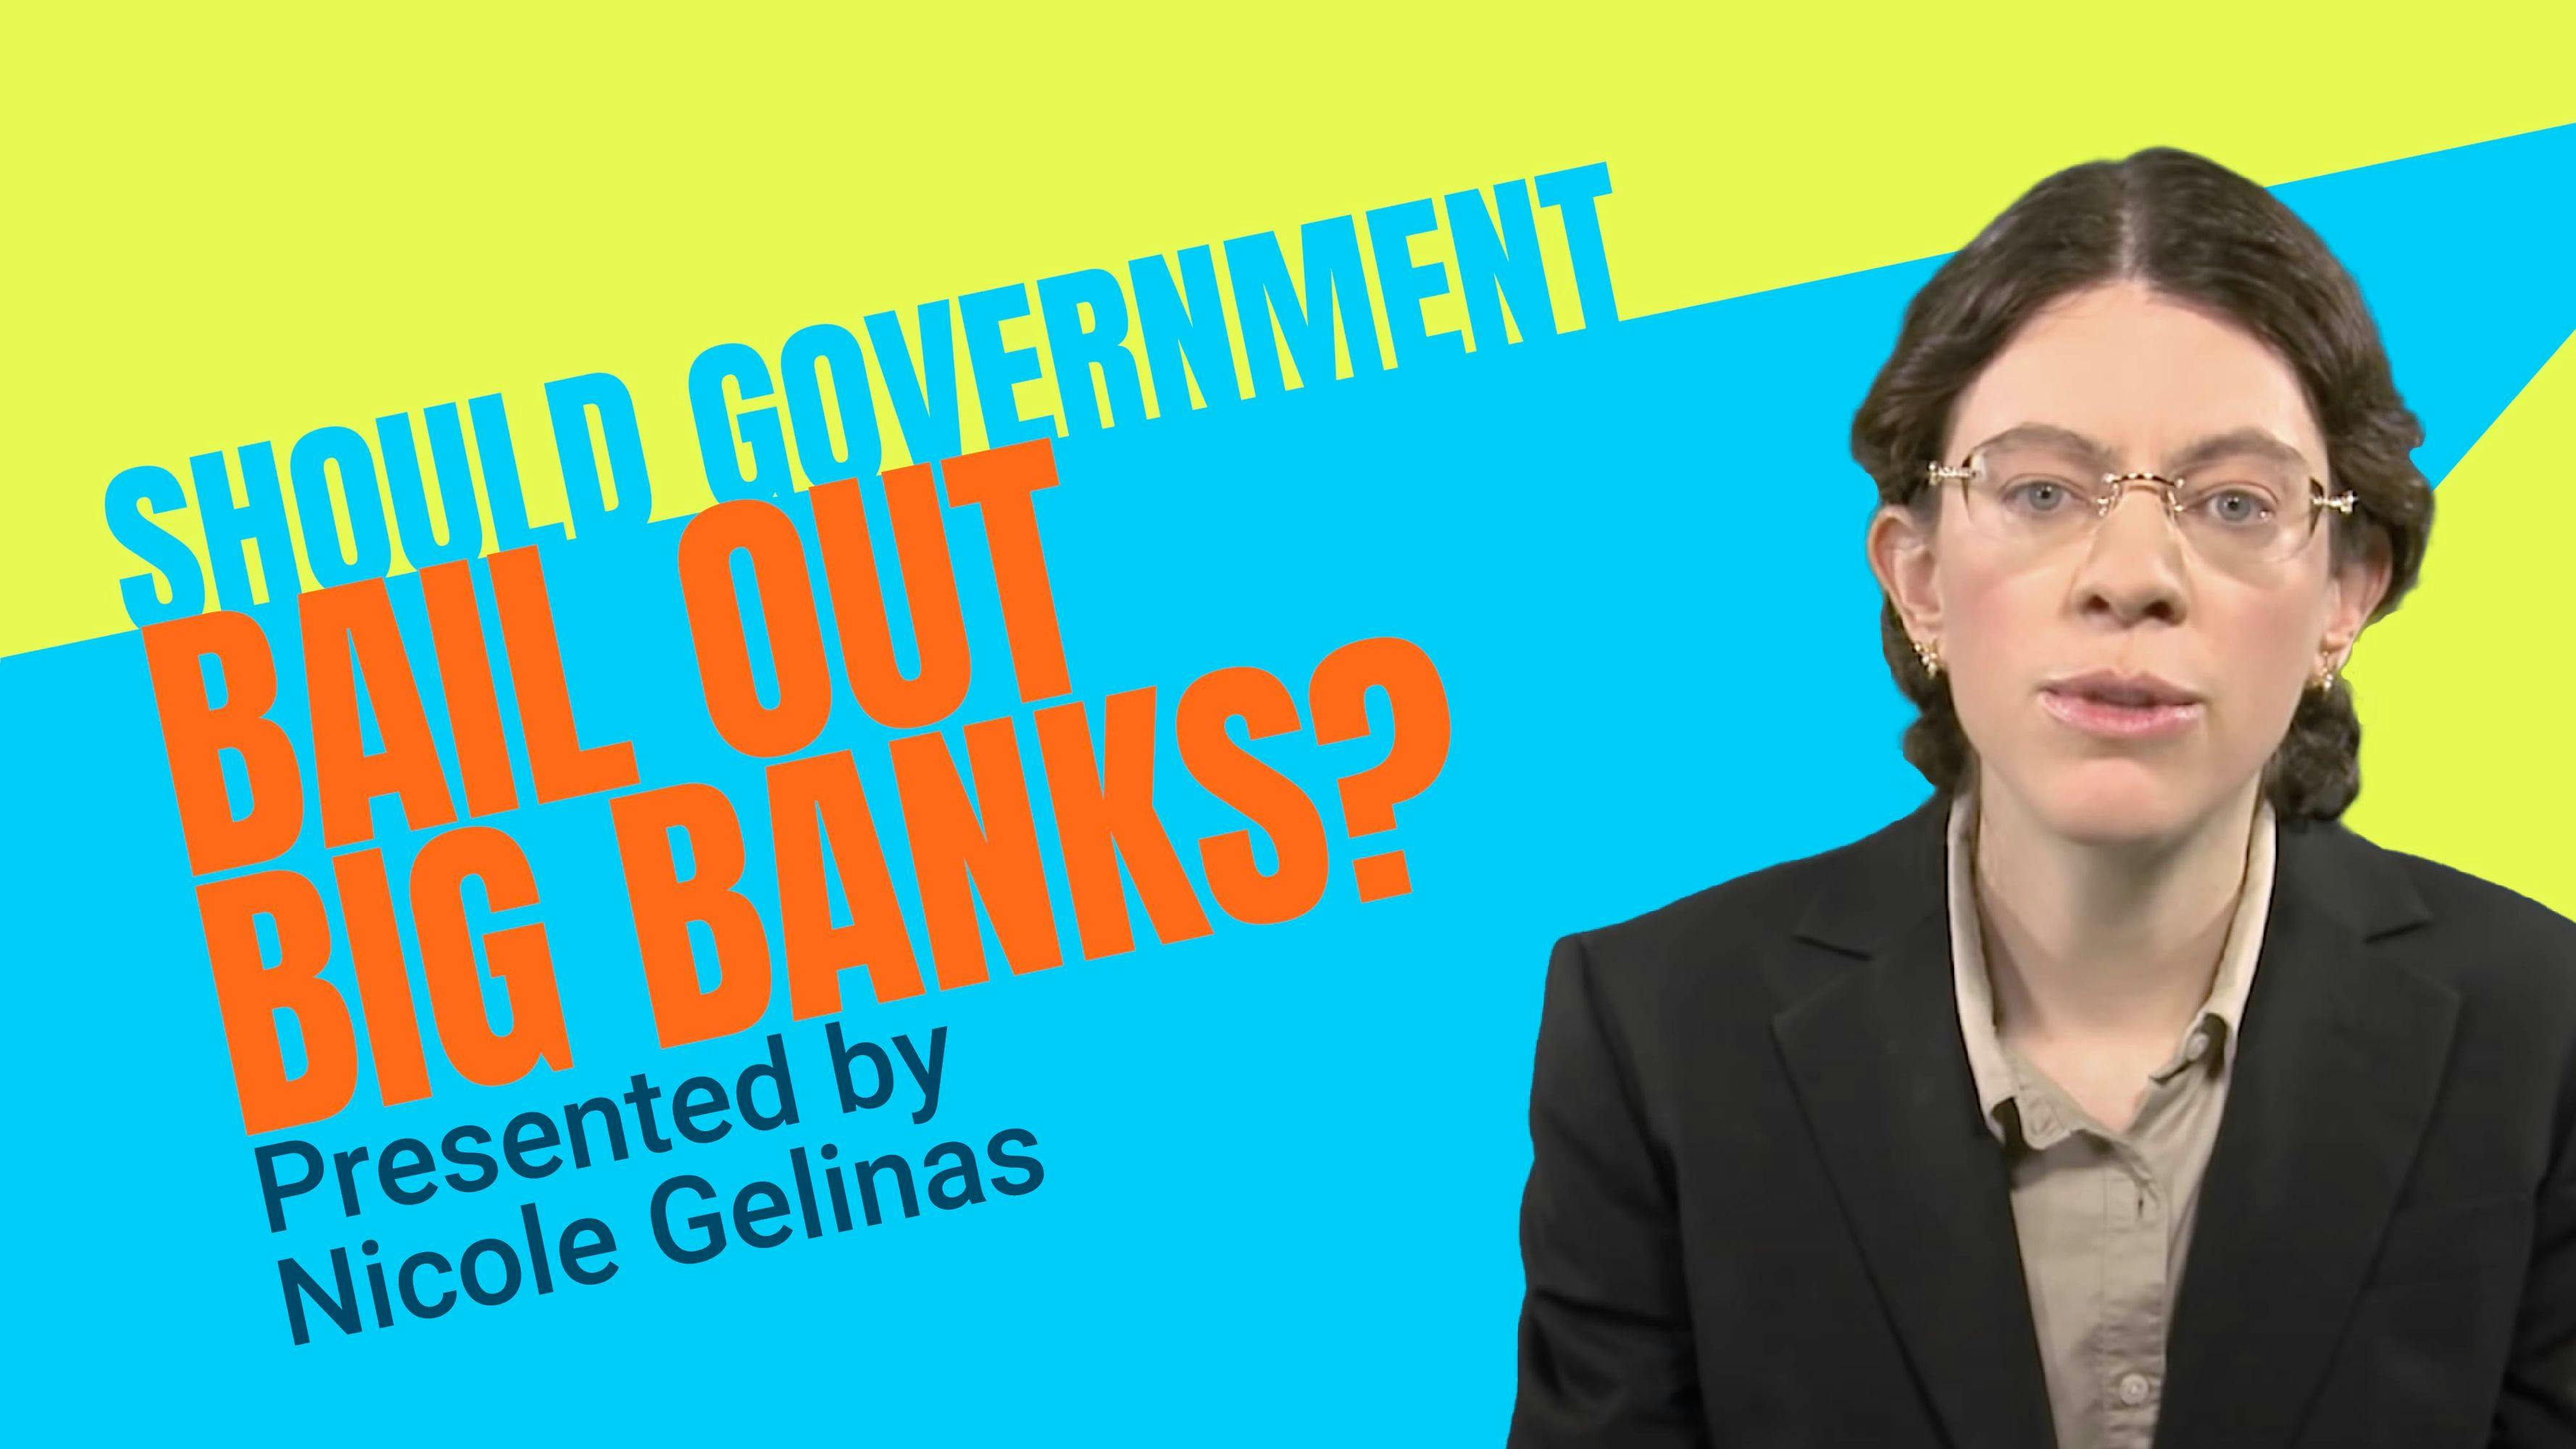 Should Government Bail Out Big Banks?